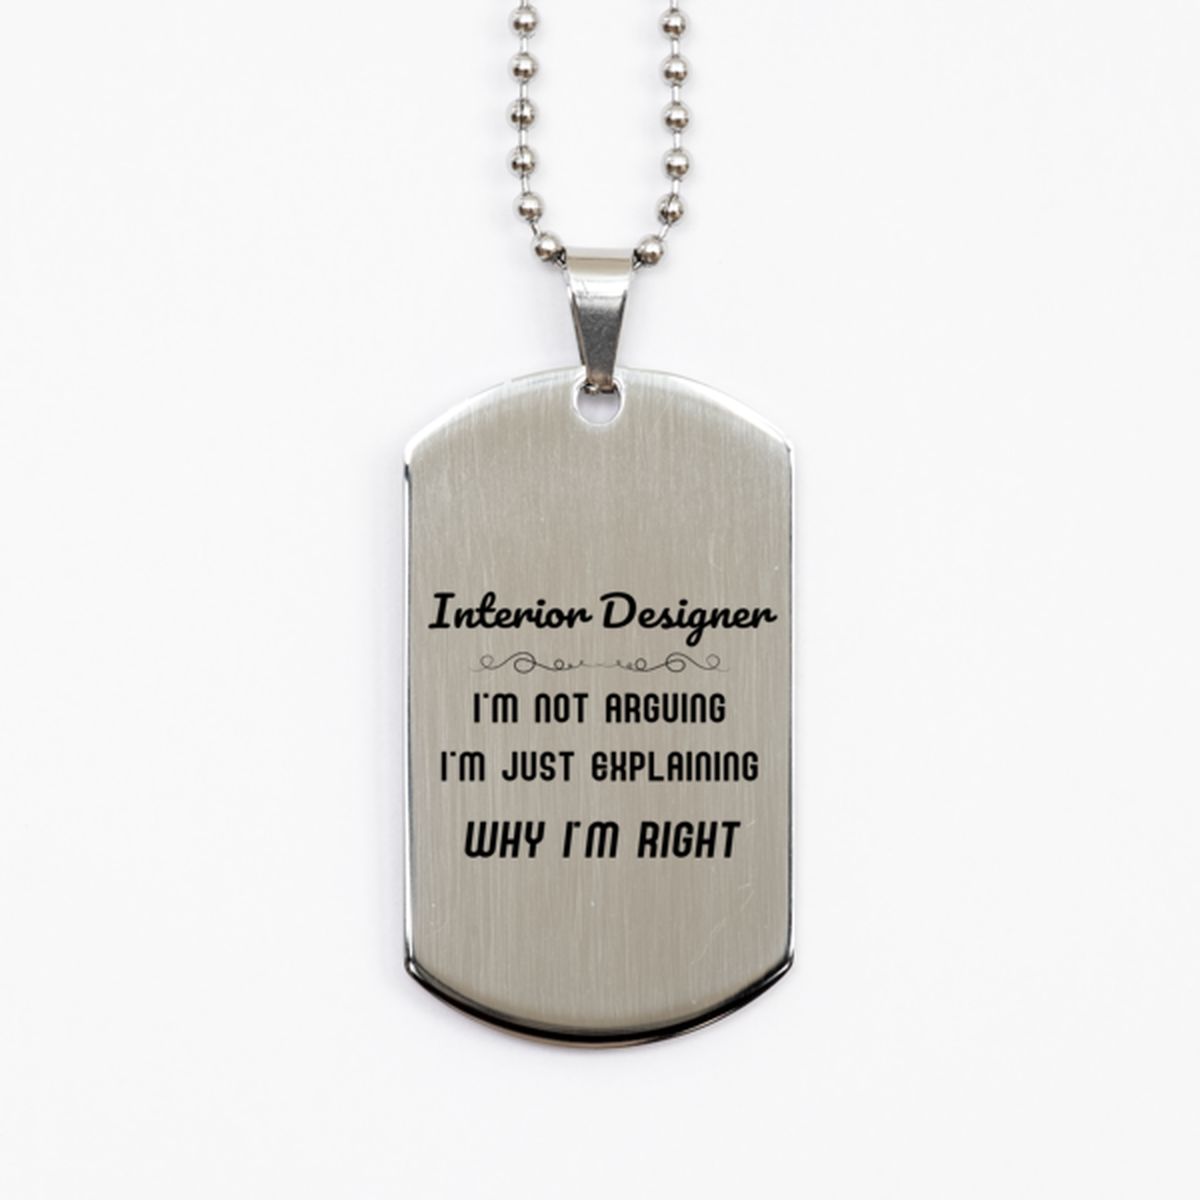 Interior Designer I'm not Arguing. I'm Just Explaining Why I'm RIGHT Silver Dog Tag, Funny Saying Quote Interior Designer Gifts For Interior Designer Graduation Birthday Christmas Gifts for Men Women Coworker